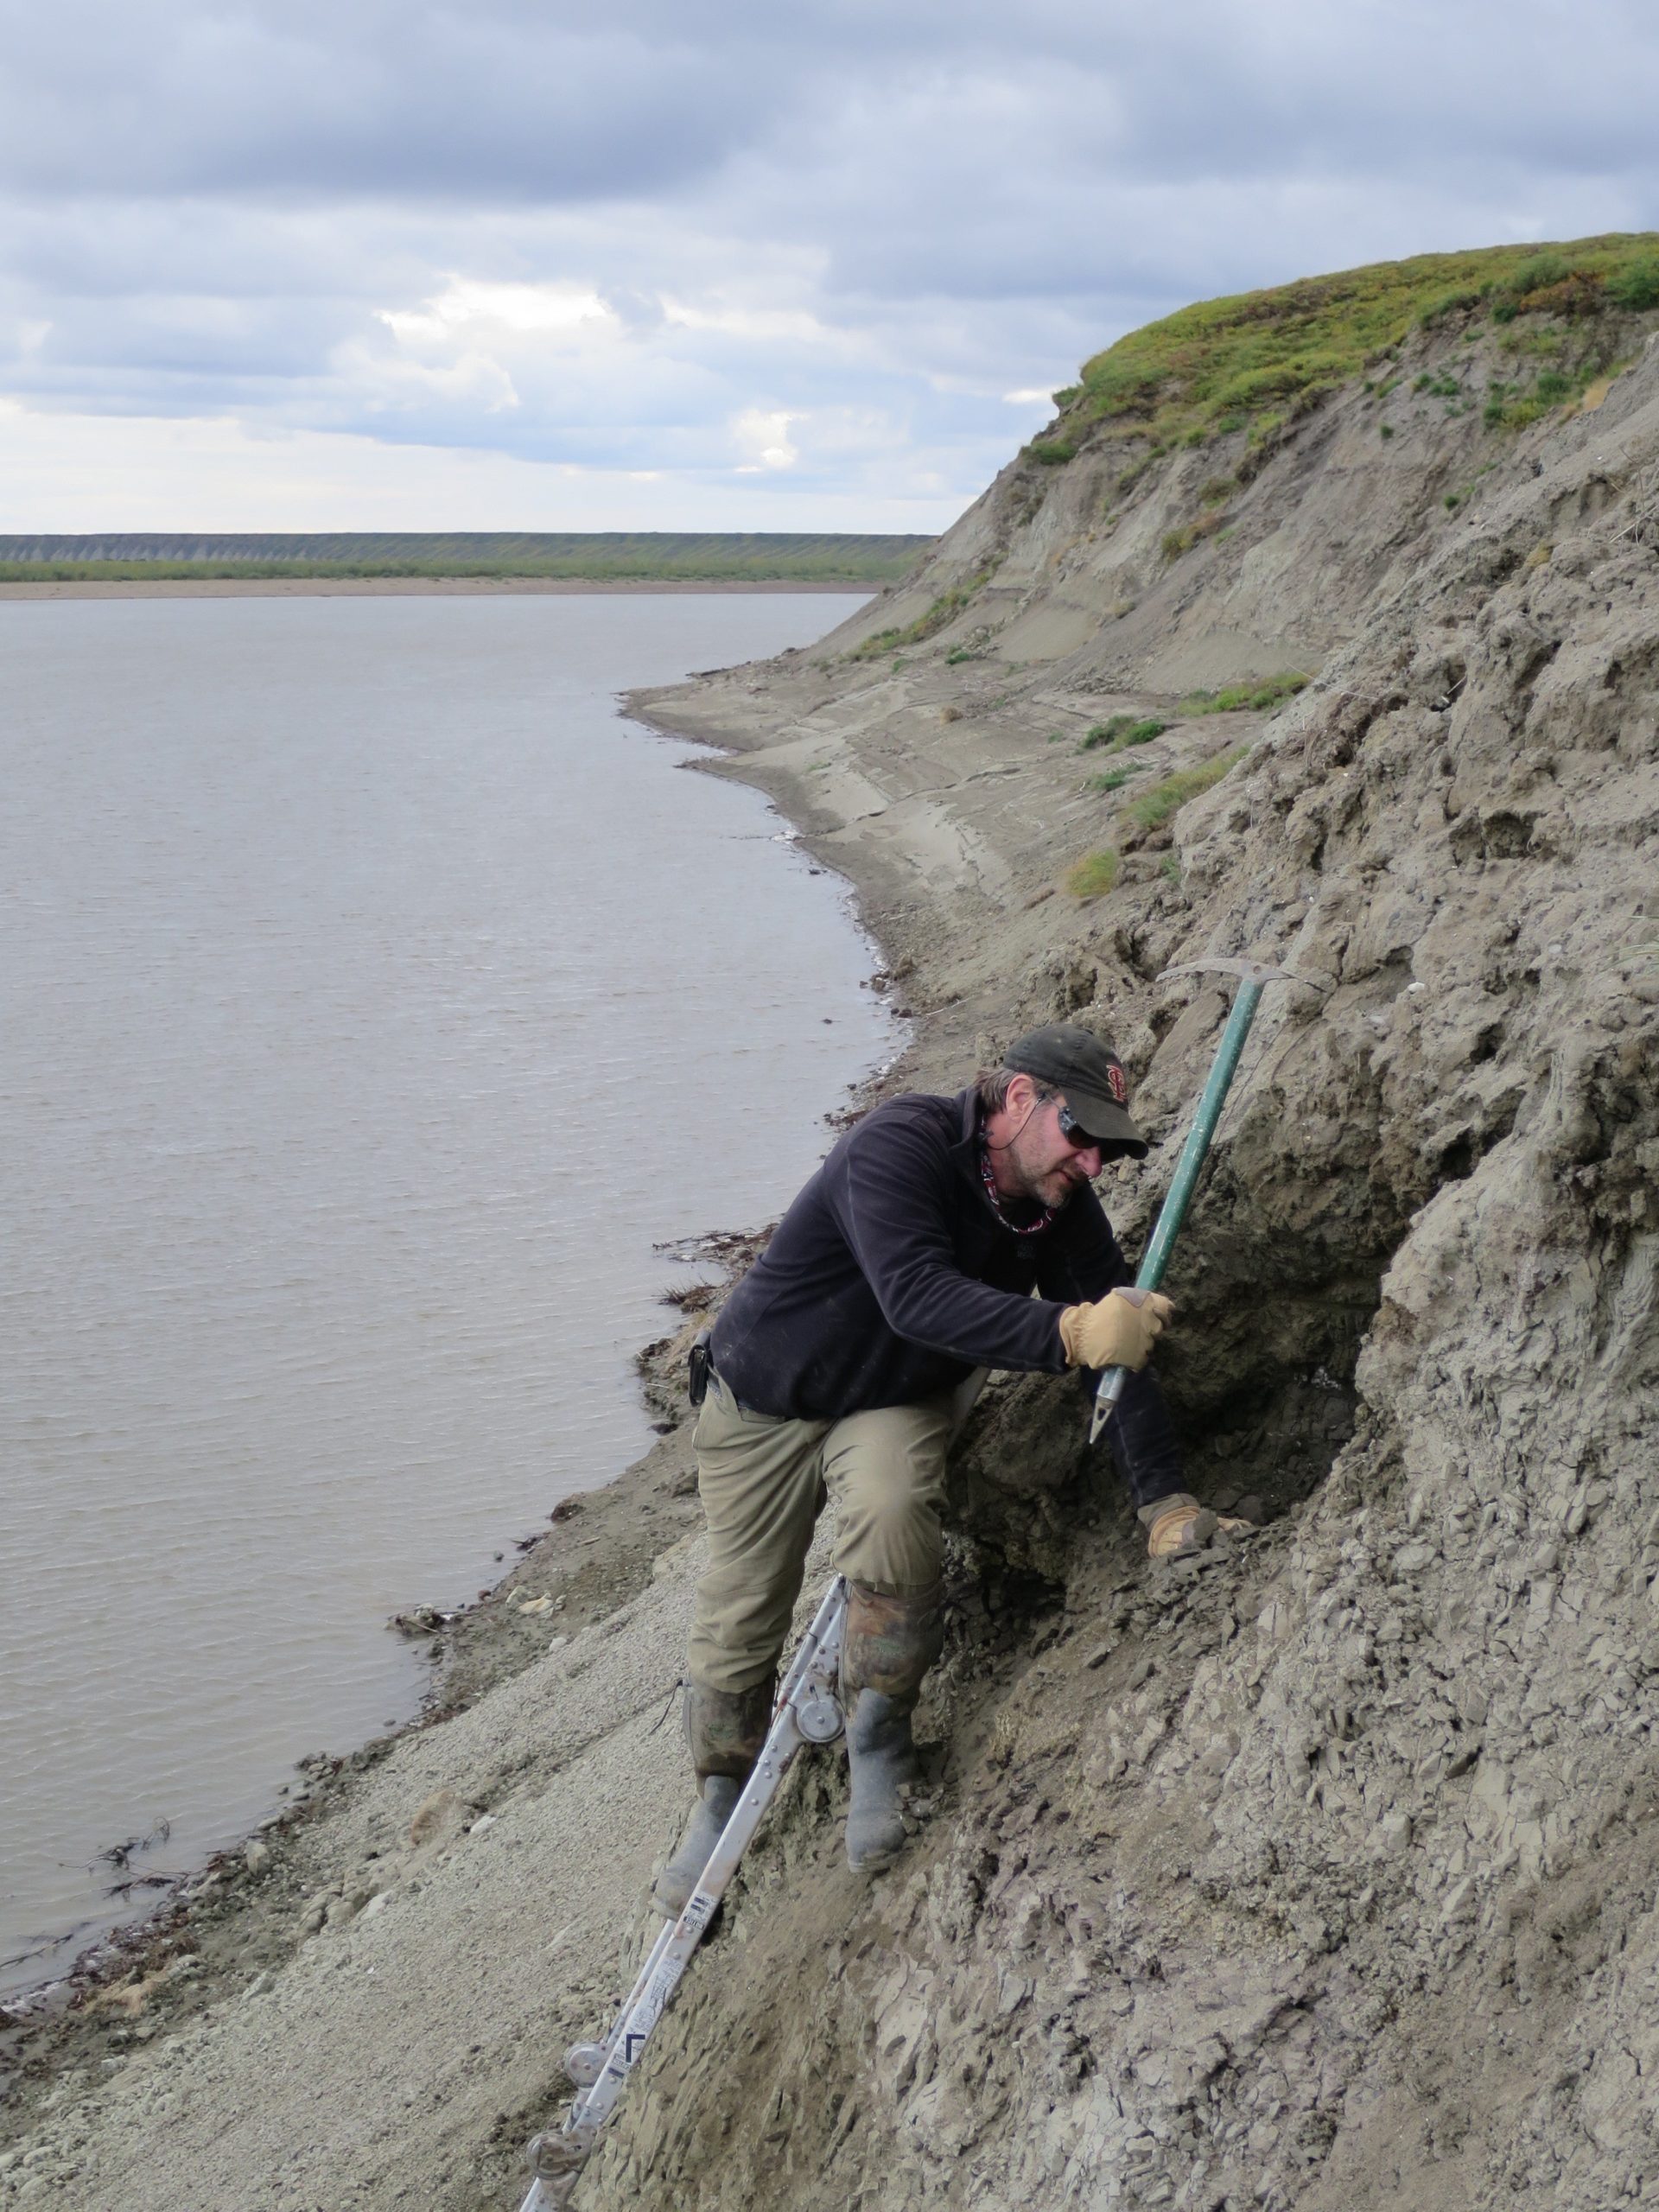 Paleontologist Greg Erickson digs through the fossil layers on the riverbank. (Photo: Patrick Druckenmiller)